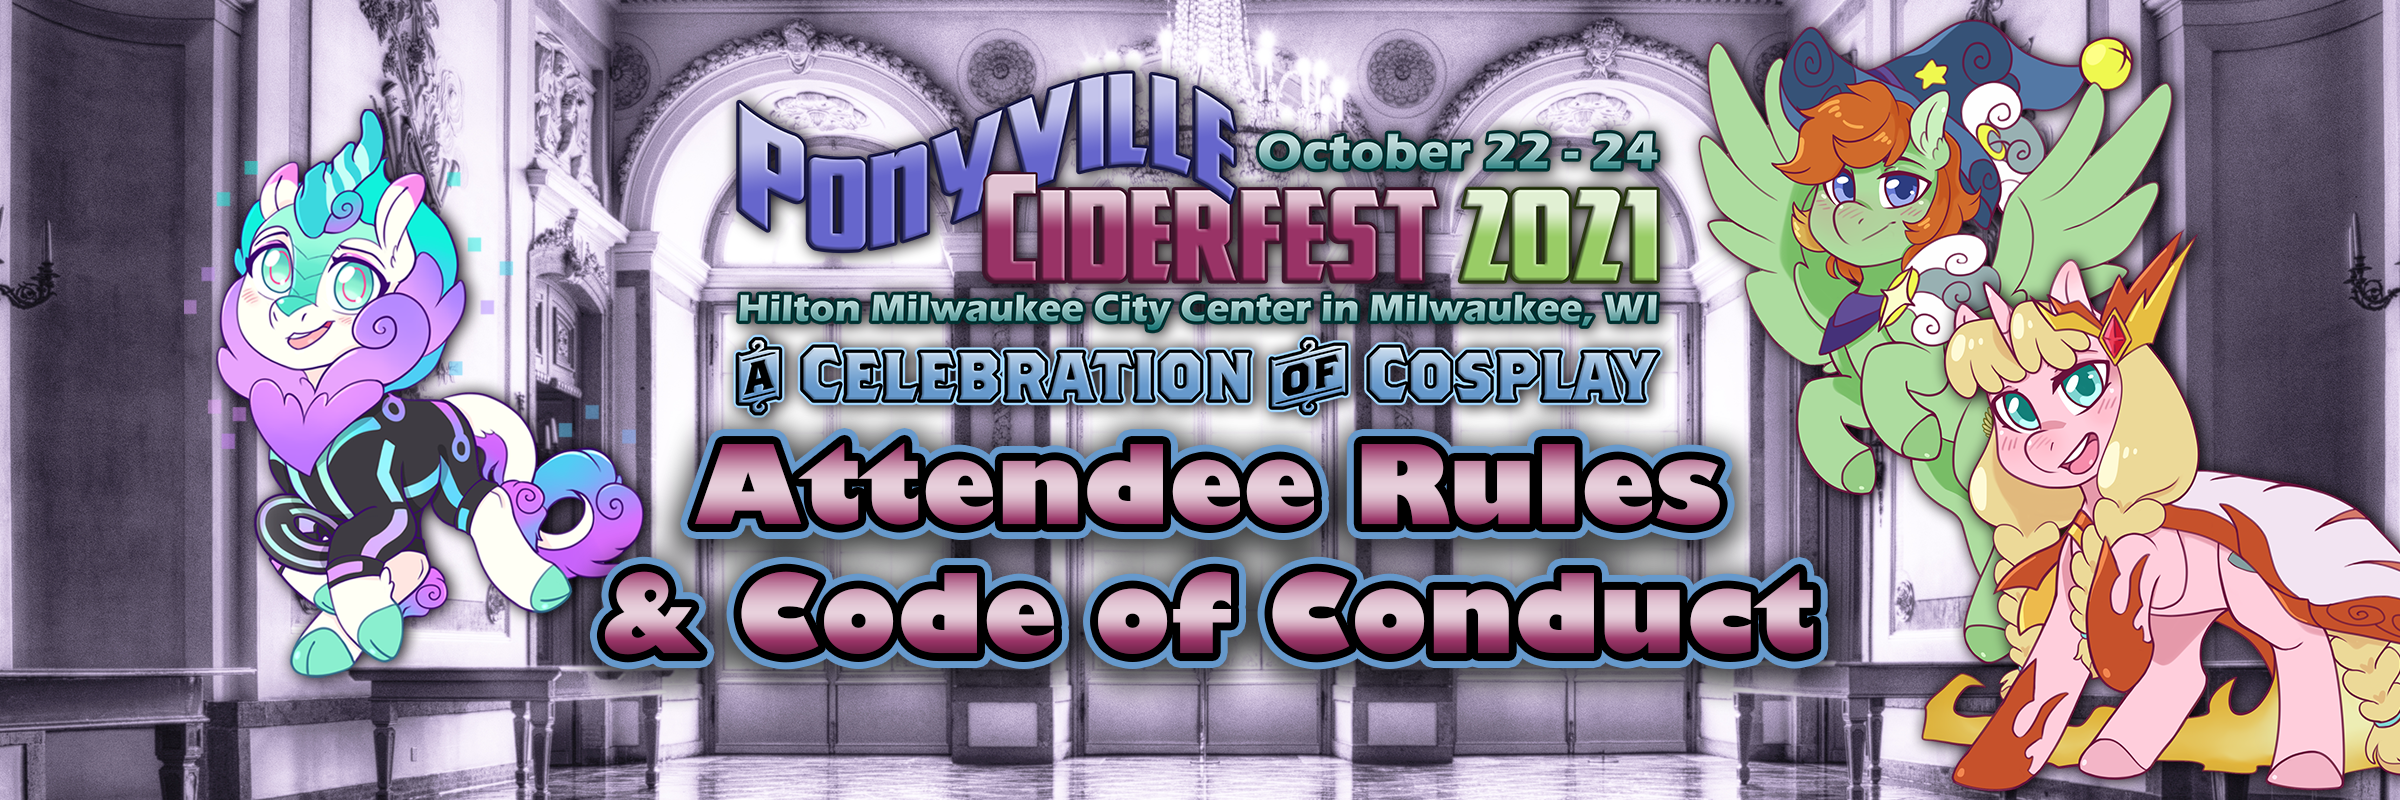 Attendee Rules & Code of Conduct